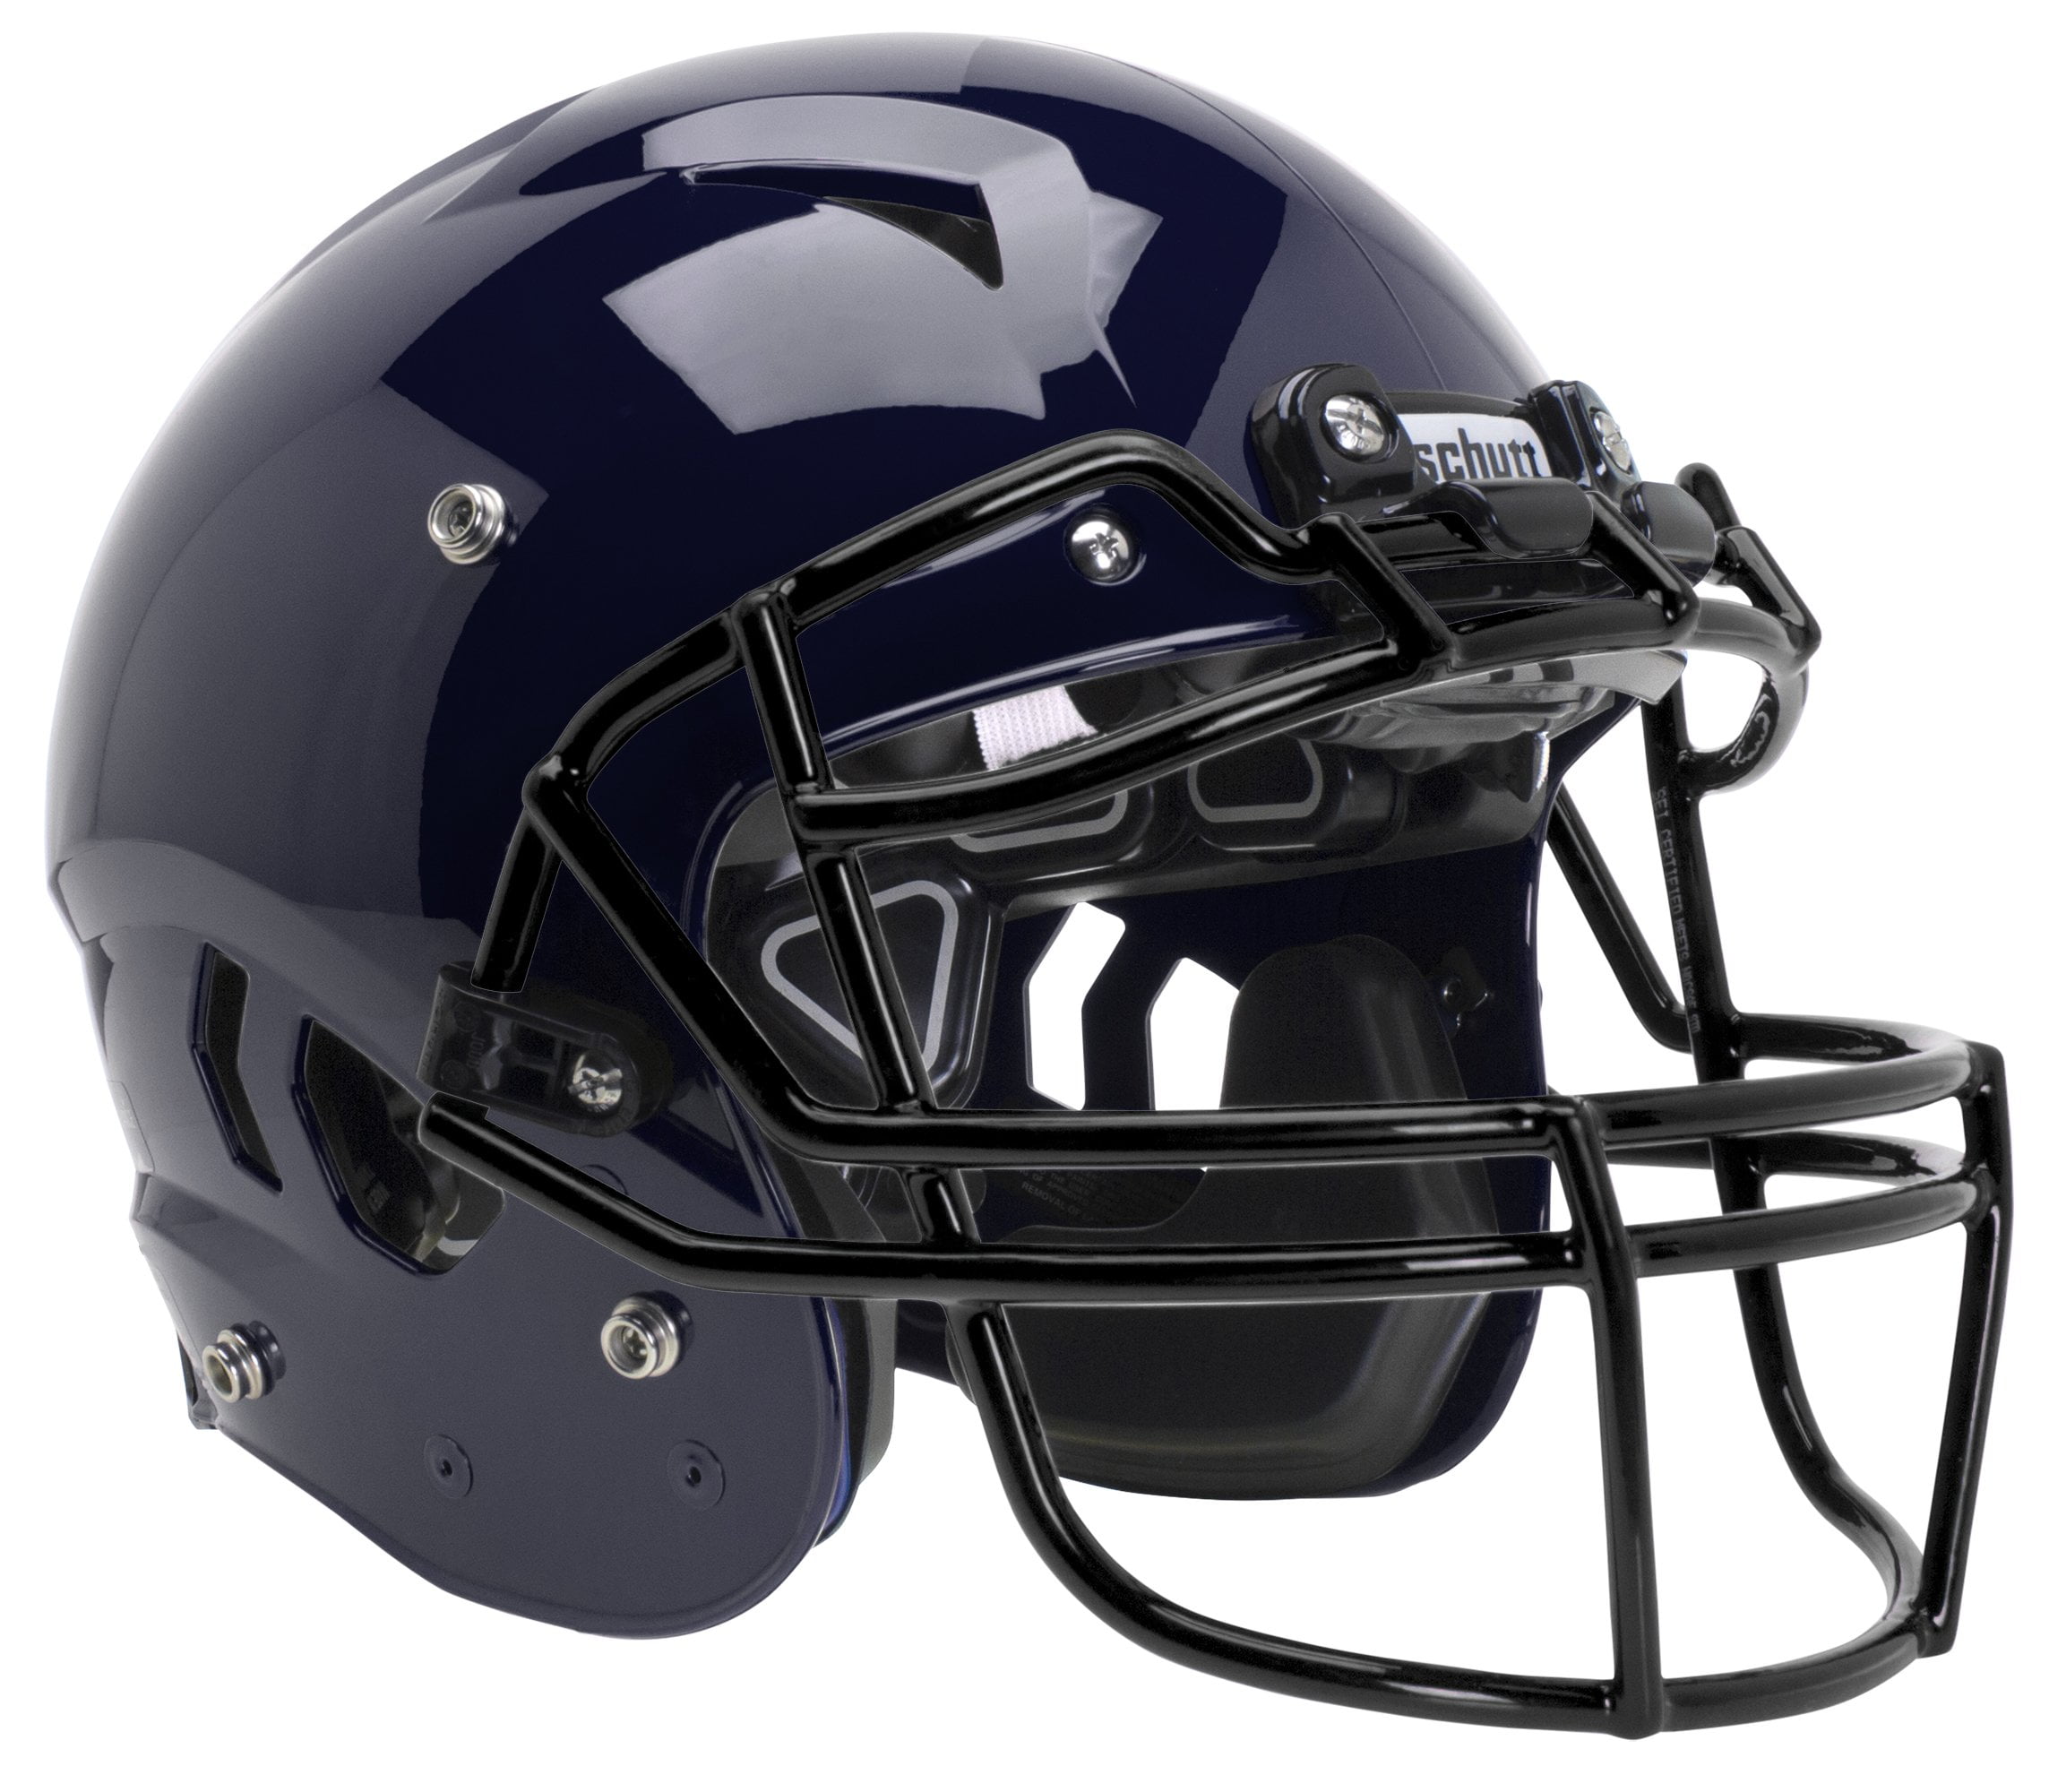 Schutt Vengeance A11 Youth Football Helmet with Unattached Facemask 